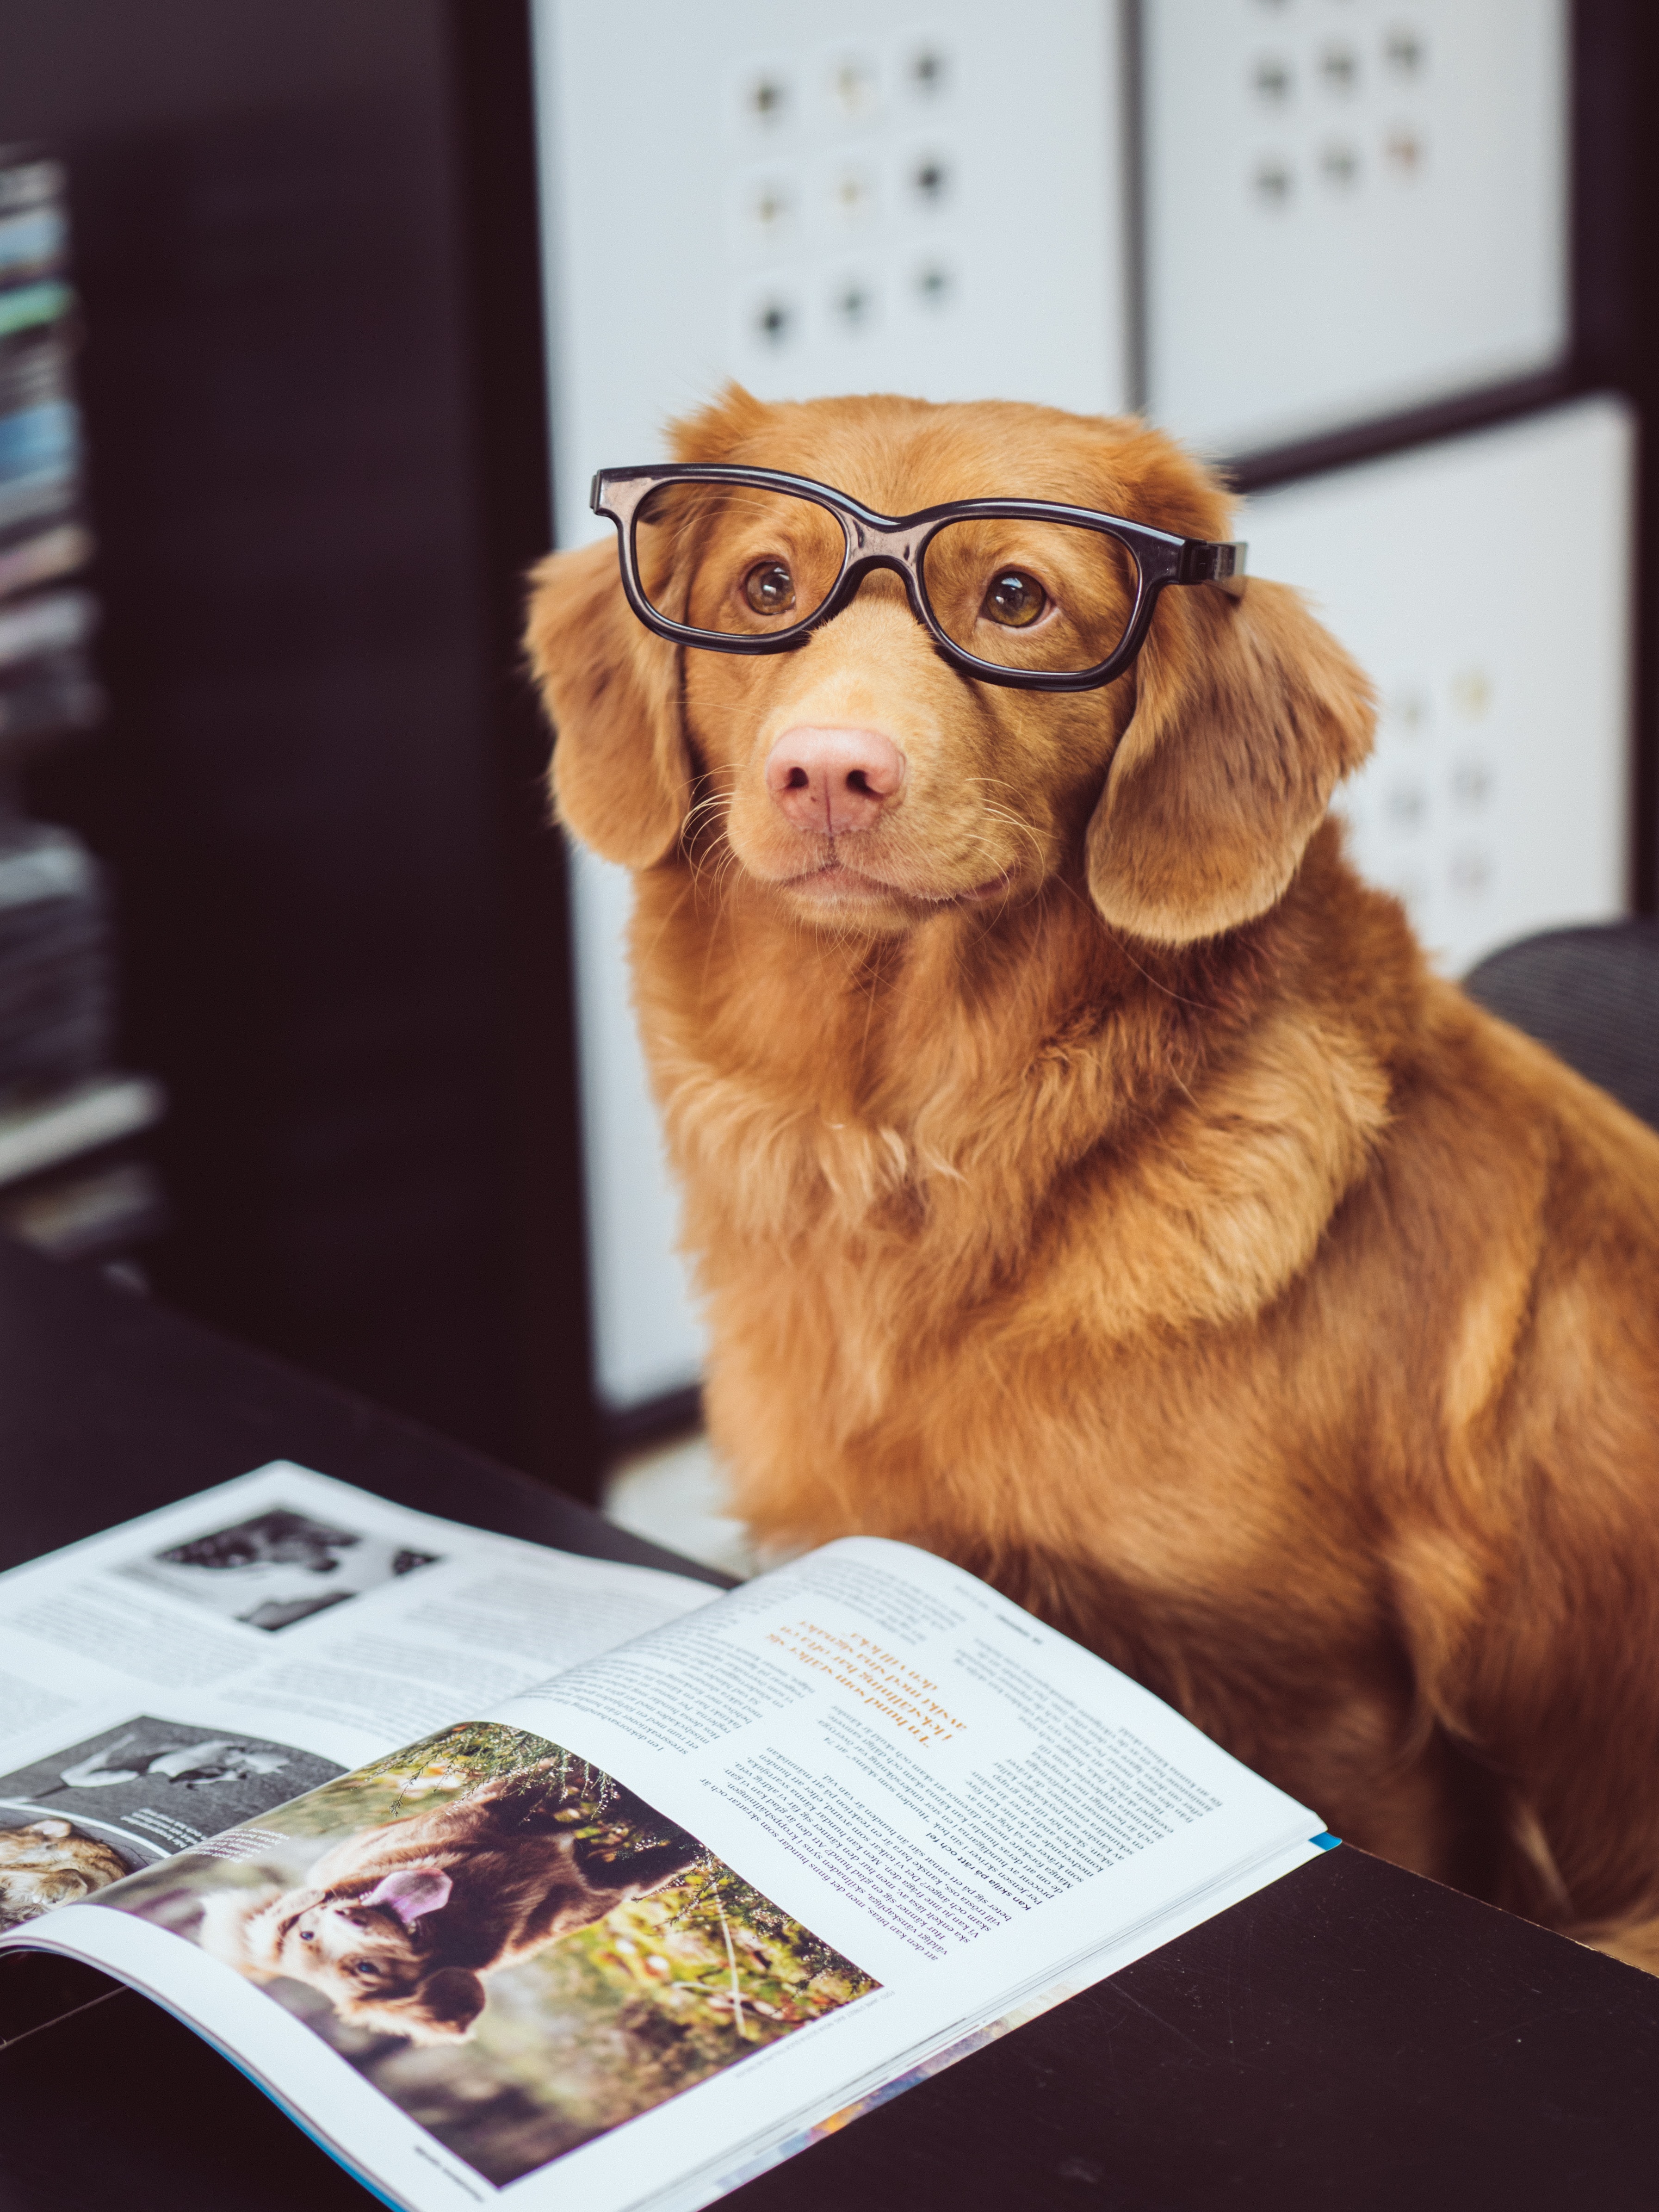 picture of a golden color dog with human reading glasses looking up with a magazine open on the table in front of what is clearly a very good dog